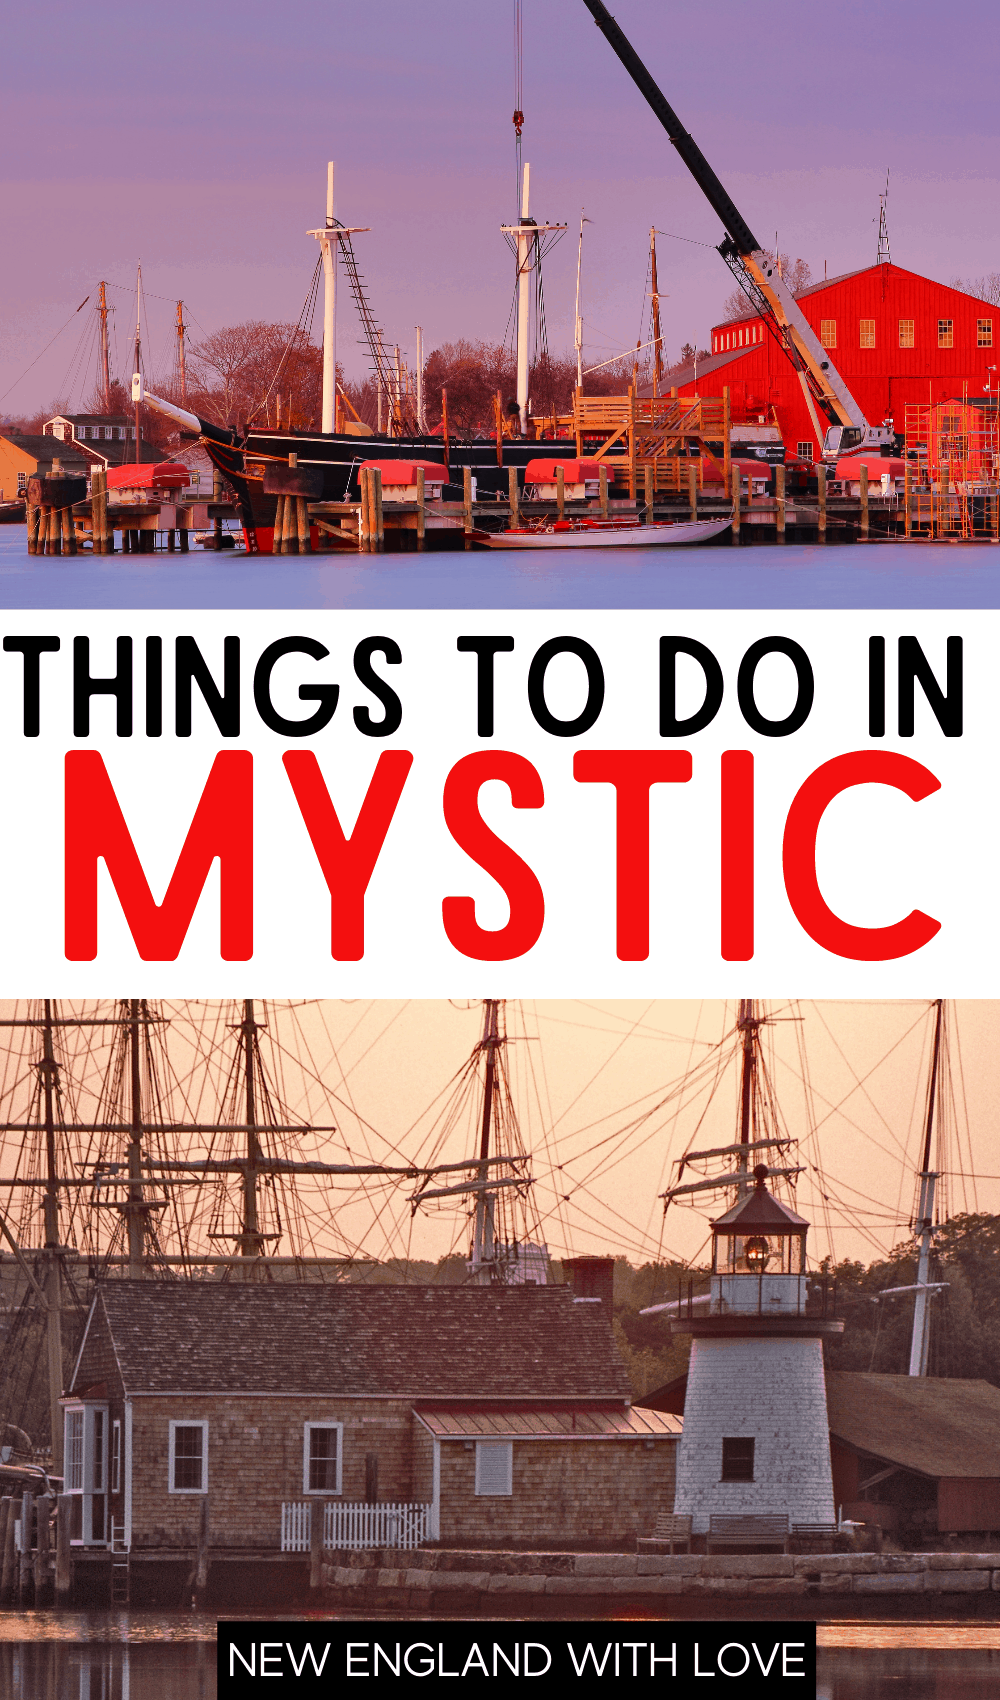 Pinterest graphic reading "THINGS TO DO IN MYSTIC" with a picture of historical boat at sunset